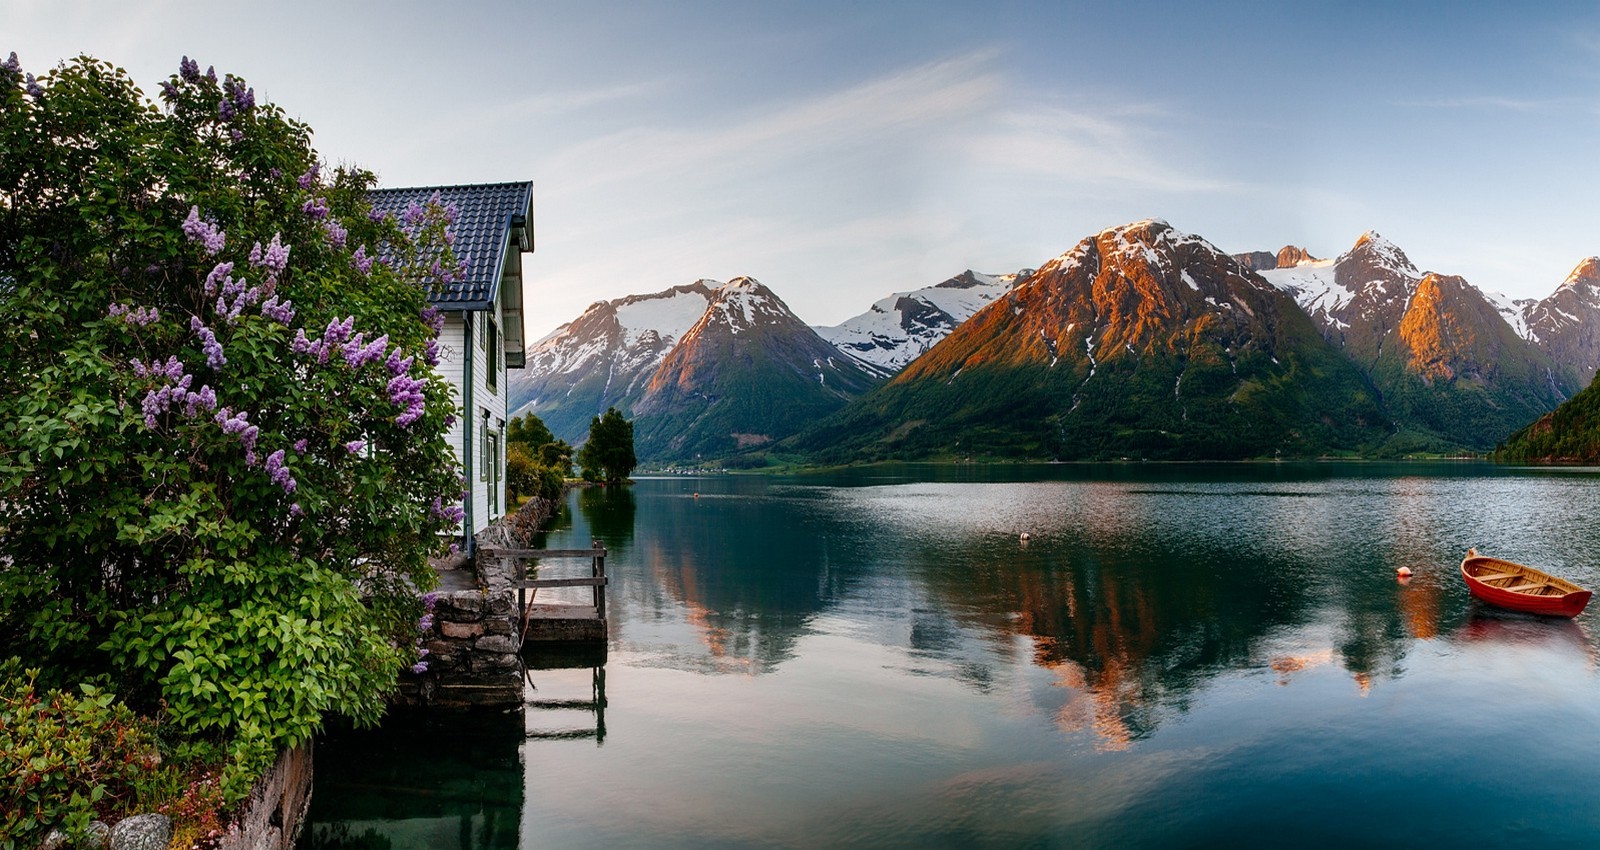 spring, Sunrise, Fjord, Norway, Mountain, House, Flowers, Snowy Peak, Boat, Sea, Reflection, Nature, Landscape Wallpaper